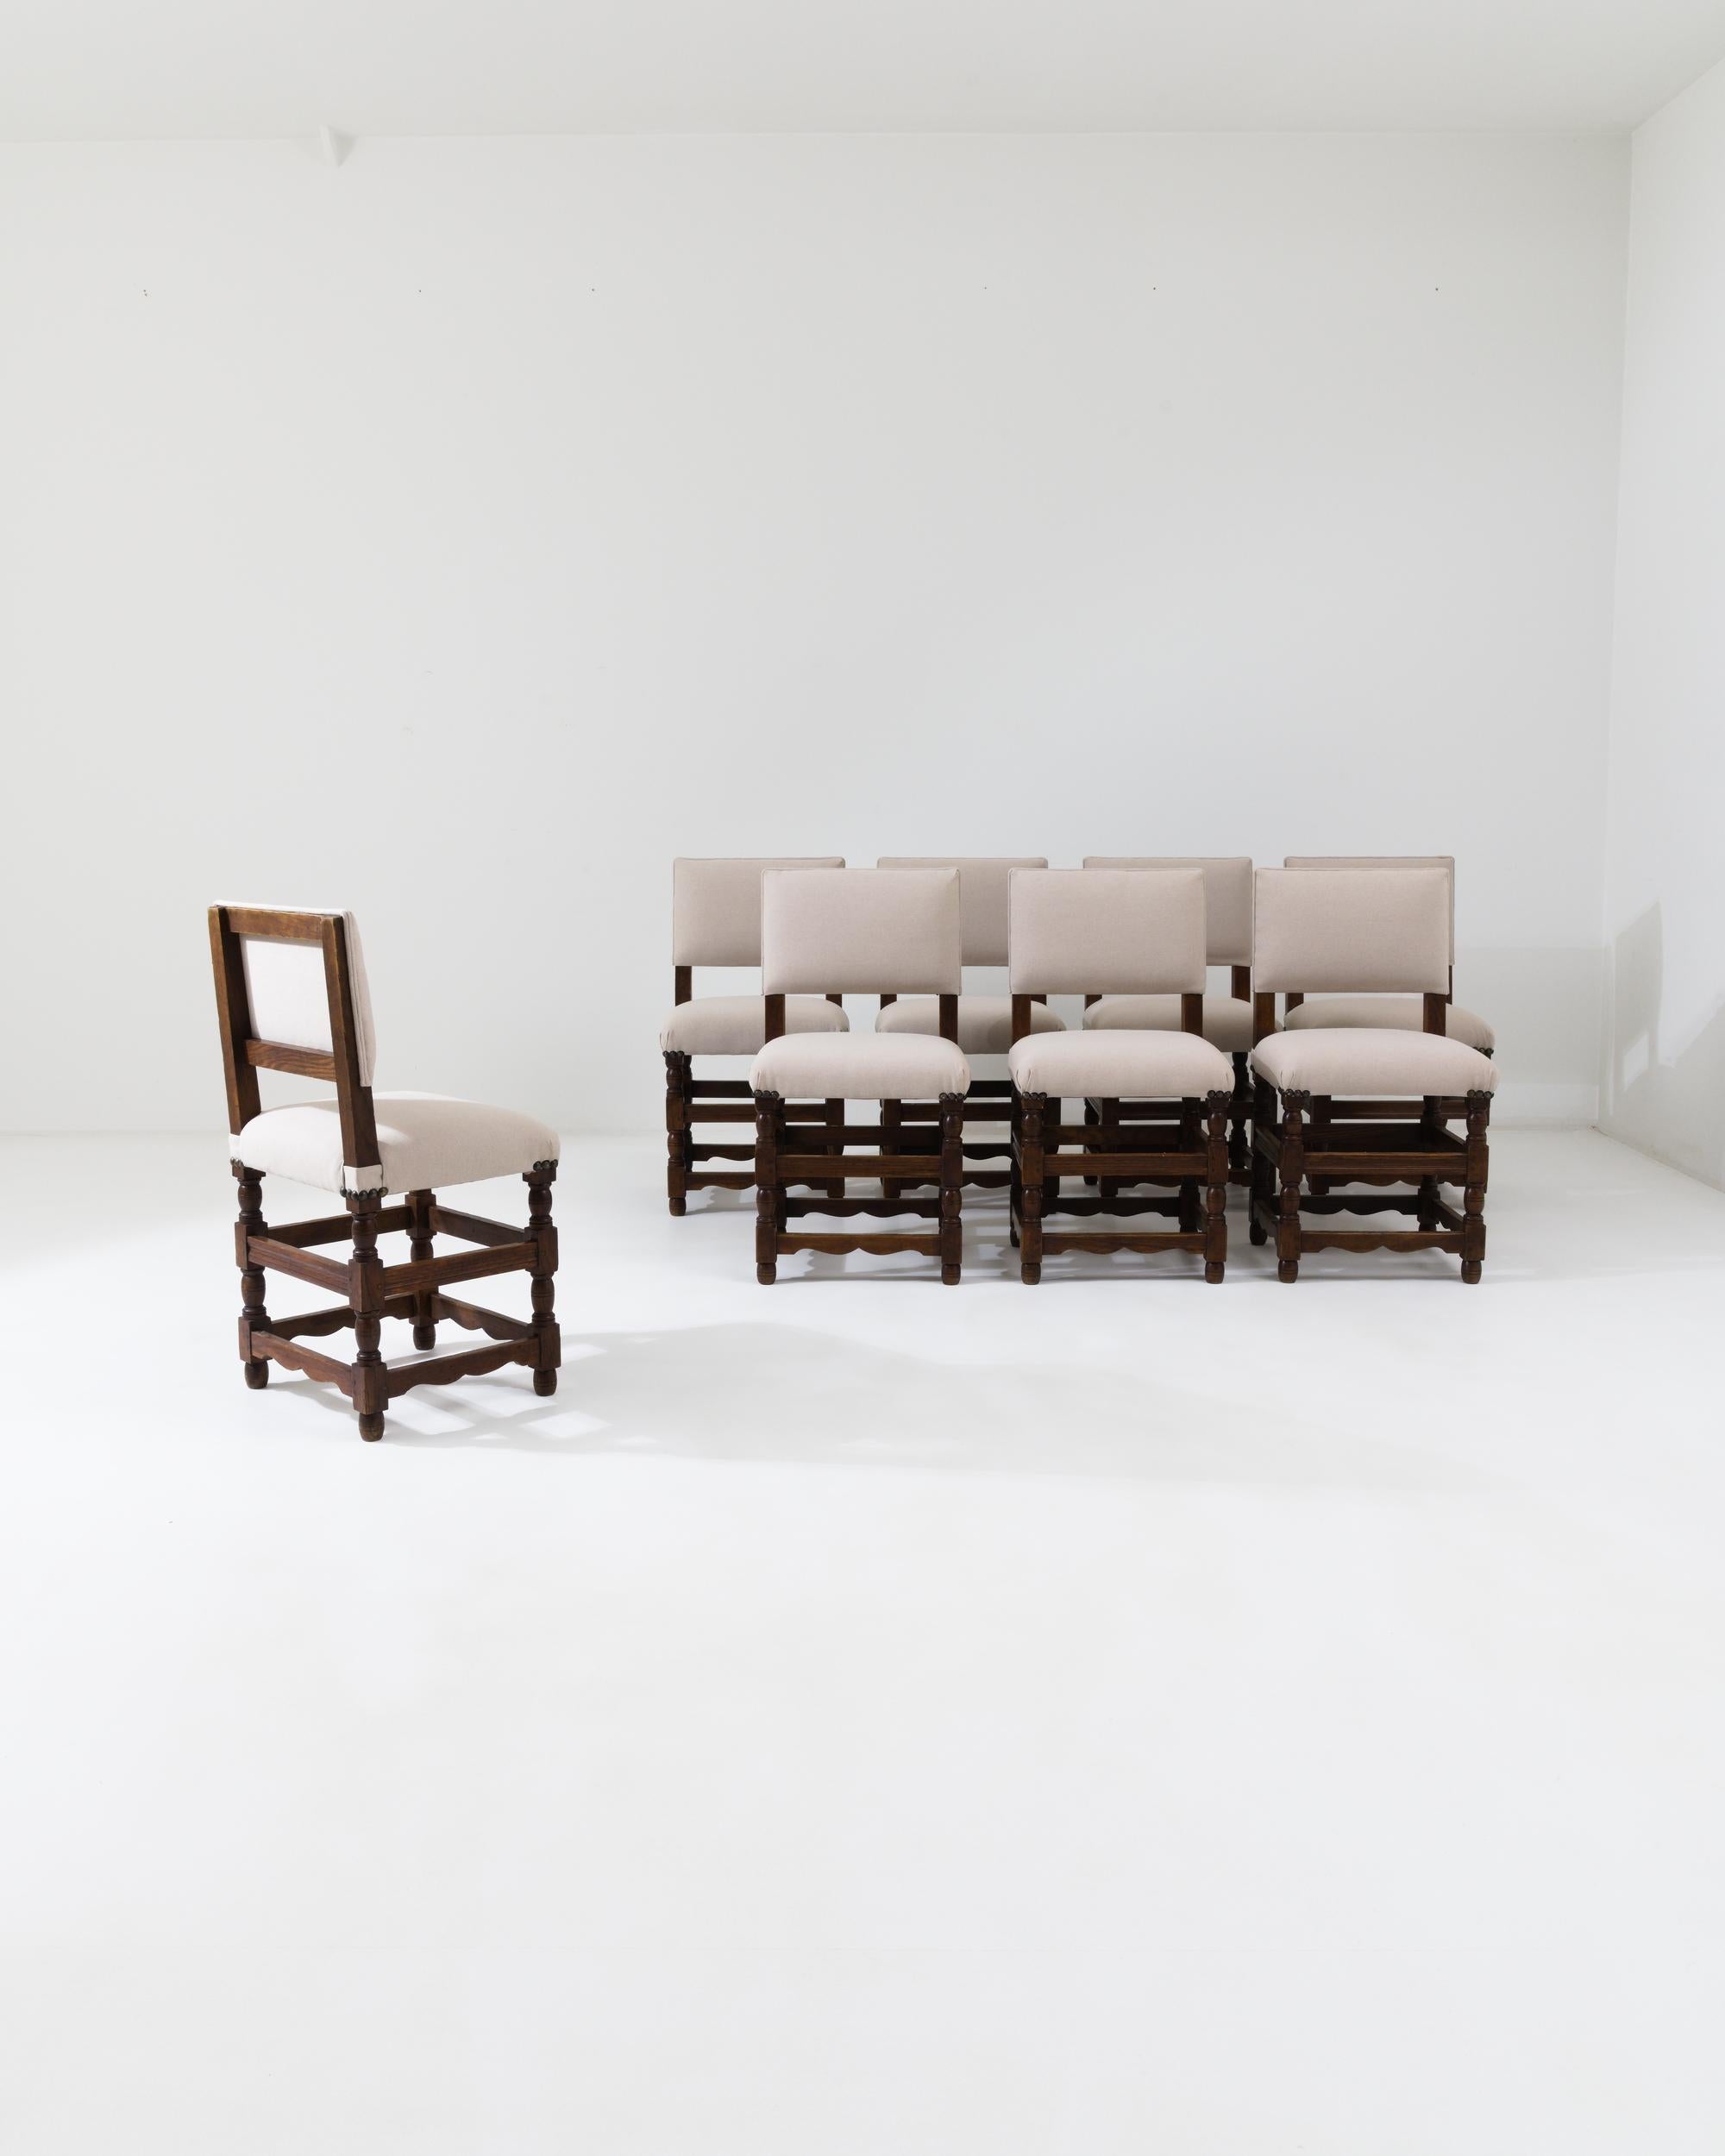 A set of wooden upholstered dining chairs created in 20th century France. This congregation of eight dining chairs presents a picture of elegance and restrained beauty. Their clean, off-white upholstery allows their wood constructions, elaborately